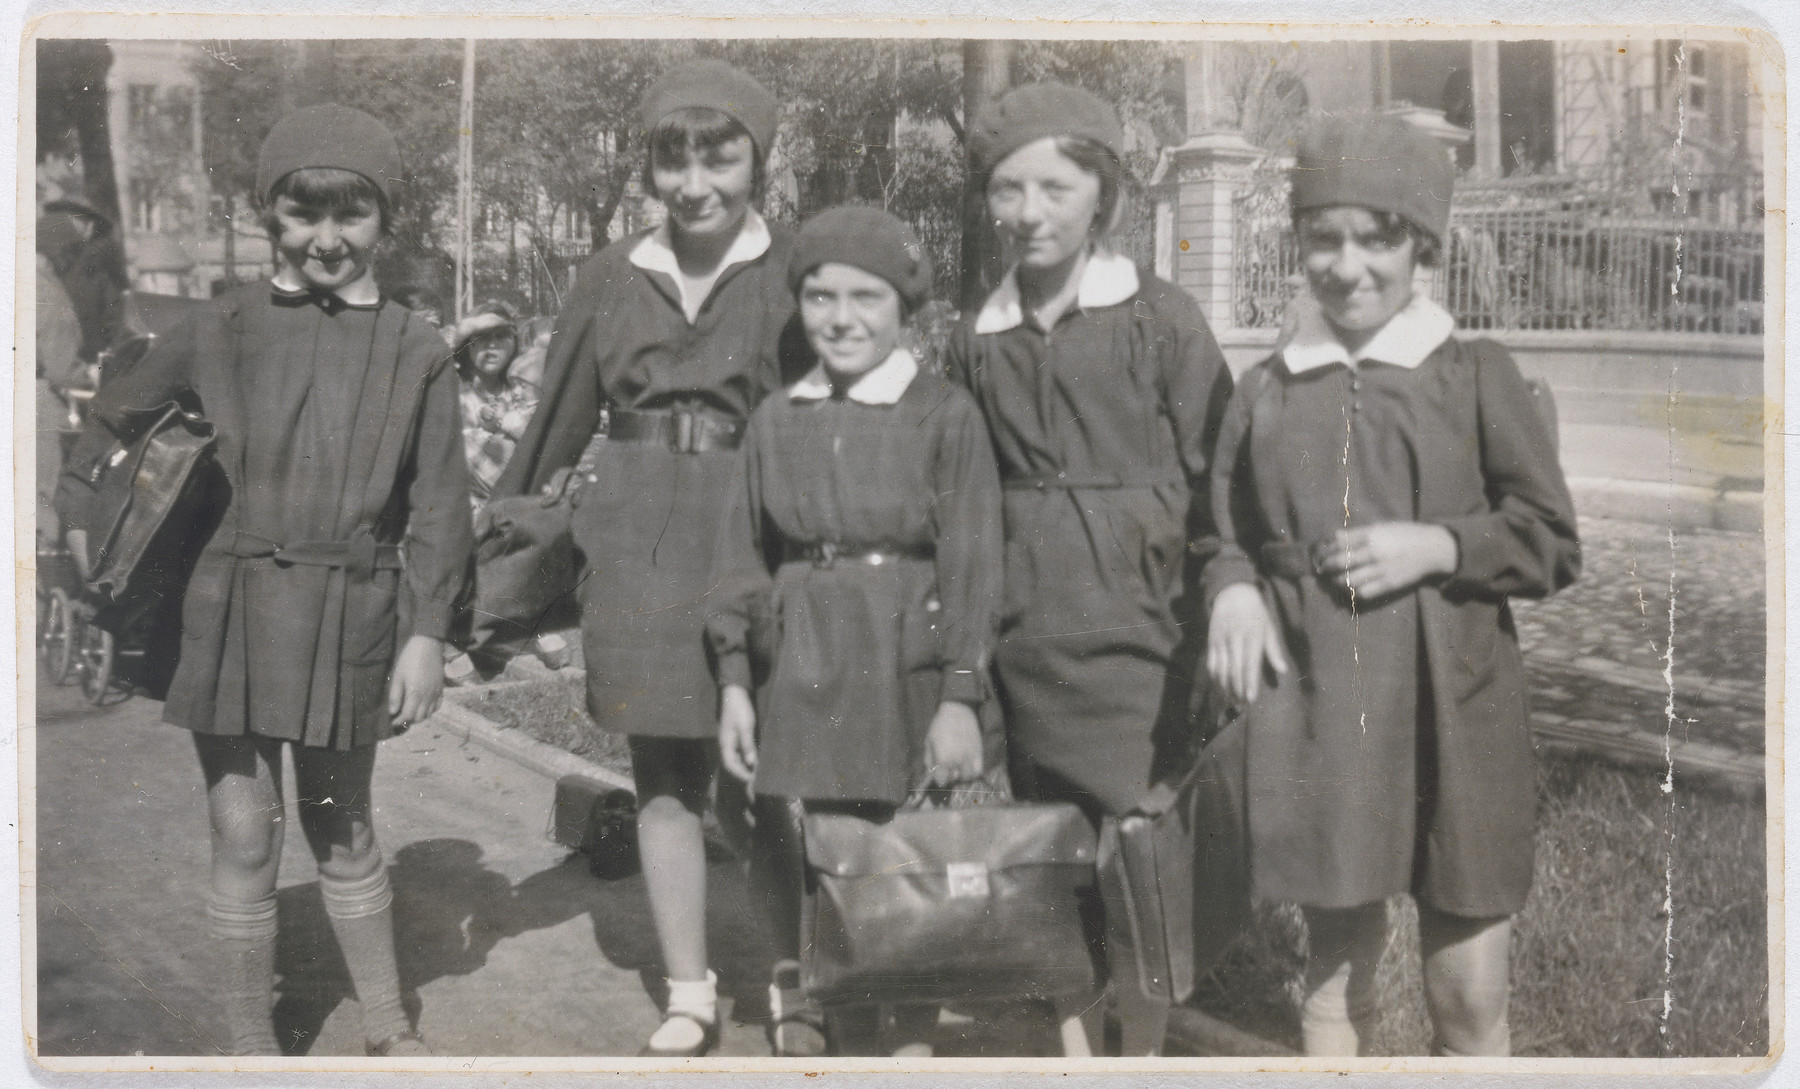 Five girls carry their book bags on their way to the Hochstein Gymnasium in Lodz.

Pictured from left to right are Mindla Reiss, Bronka Rheingold, Marysia Sheinberg, Mira Poznanska, and Bela Ginzburg.    

They graduated from high school in 1938.  The photograph was taken by Fania Ginzburg Rubashkin, Bela's older sister. Bronka Rheingold, Bela Ginzburg and Marysia Sheinberg were killed in the Warsaw ghetto.  Mira Poznanska was murdered together with her husband in Czestochowa.